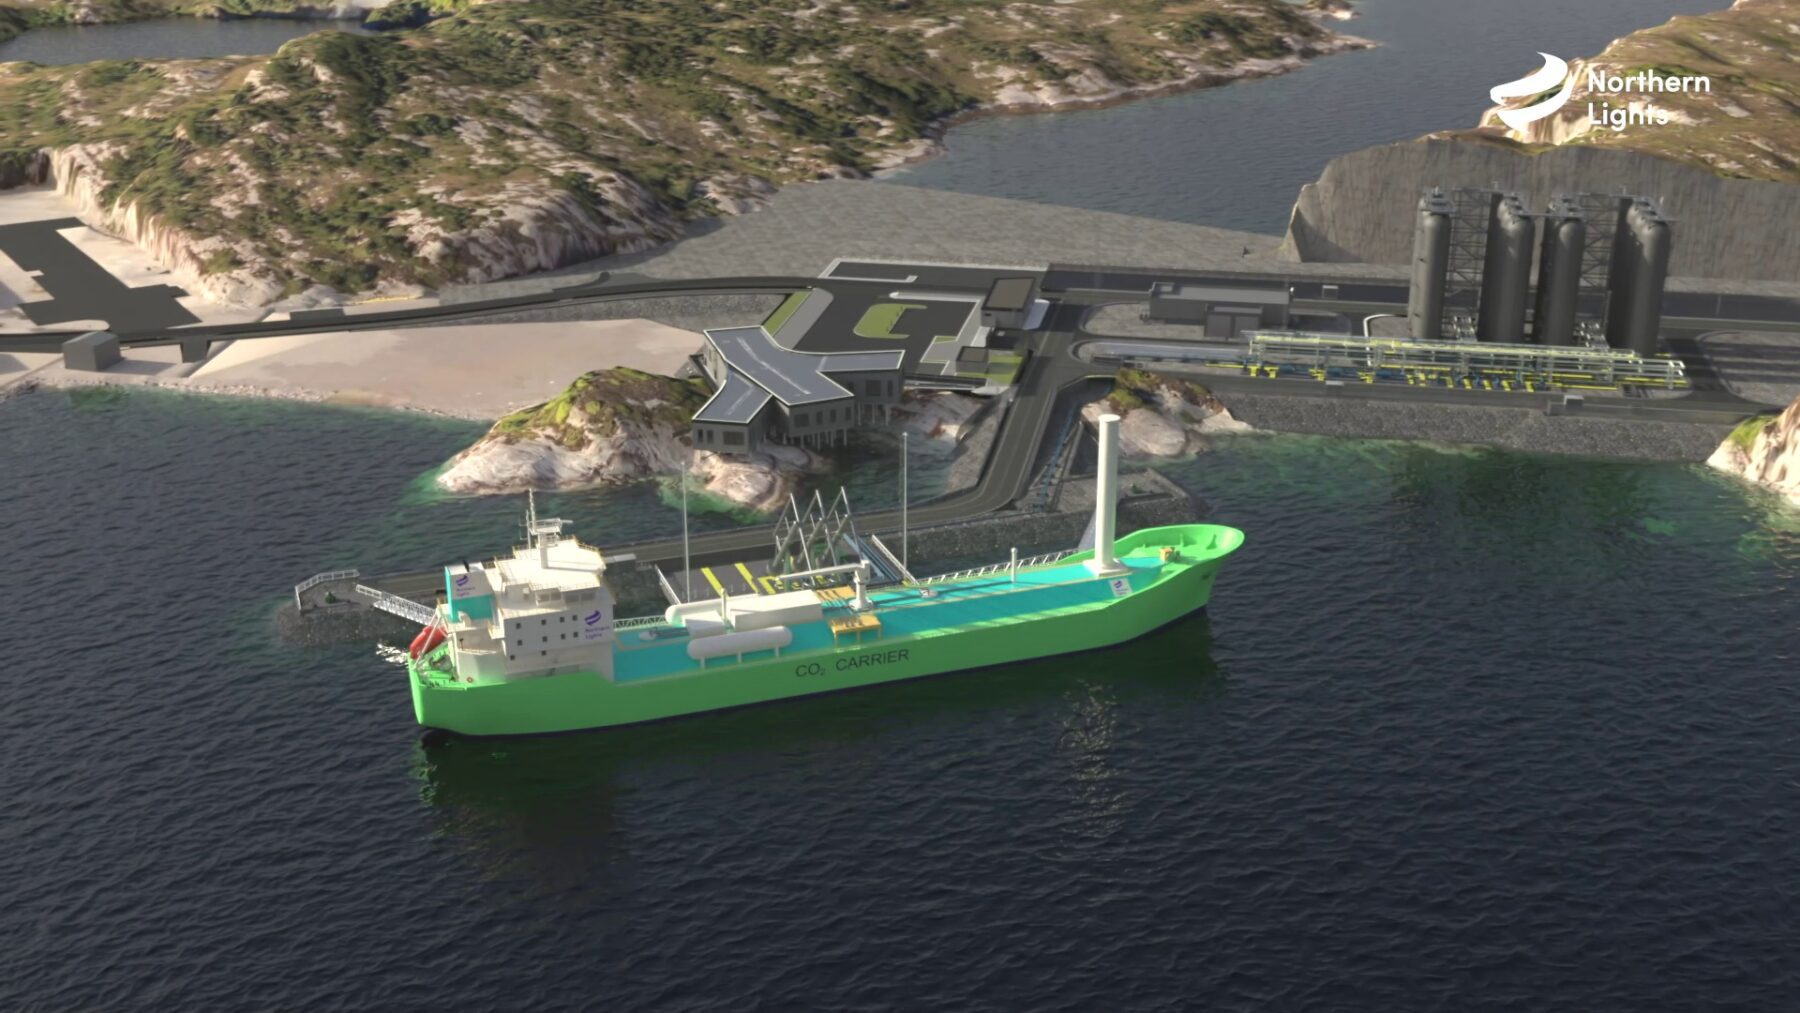 Dedicated CO2 Carriers Ordered for Norway’s Northern Lights Carbon Capture and Storage Project